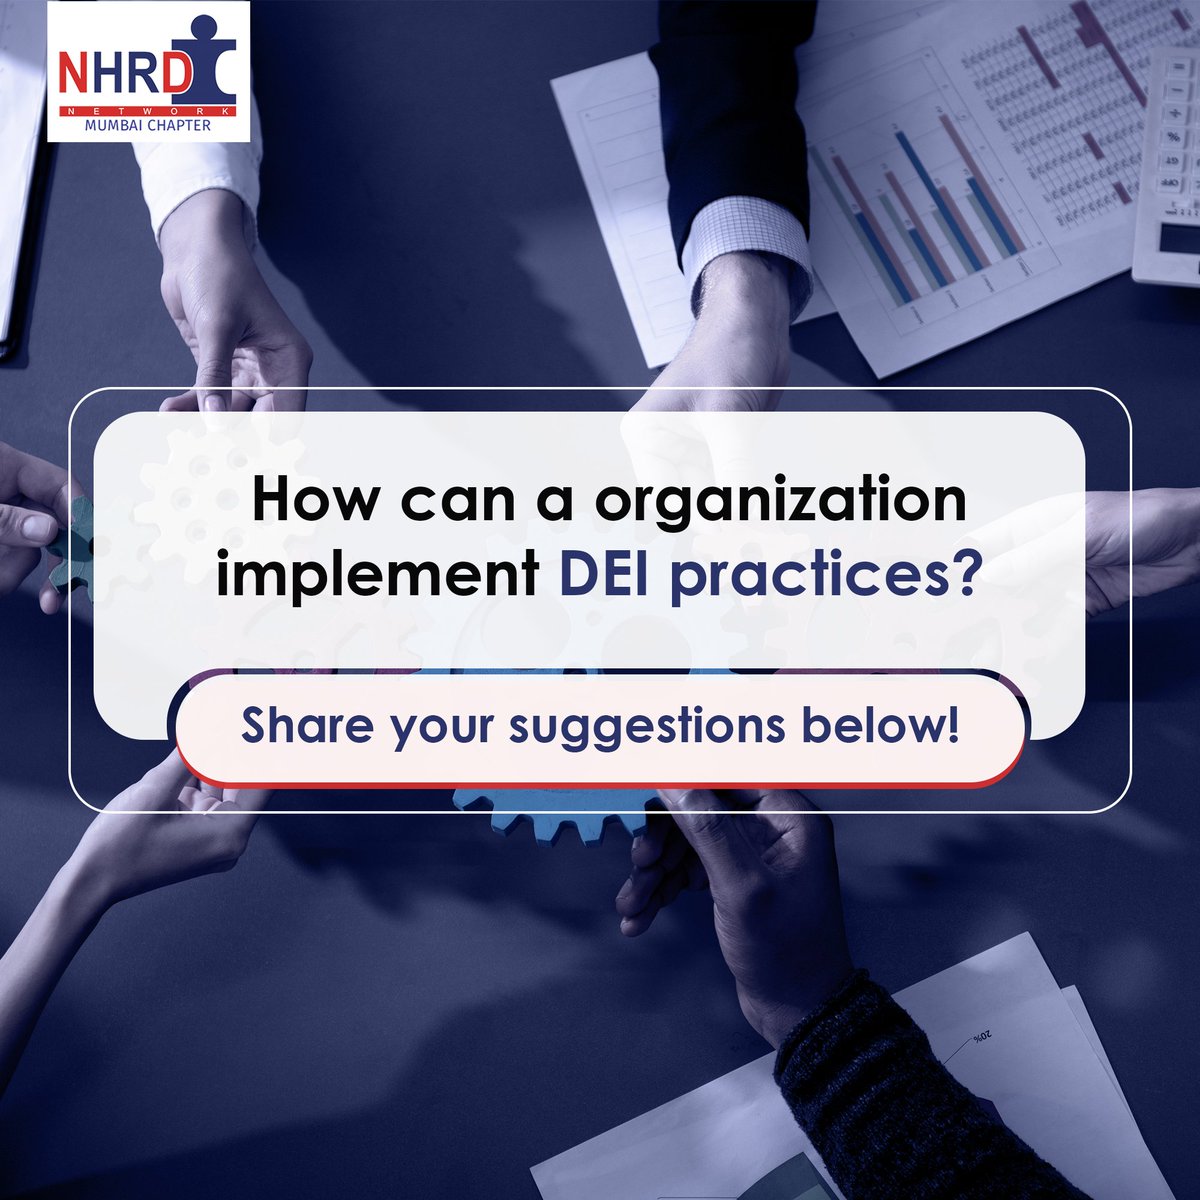 Share your ideas with us in the comments below! #NHRDN #HR #HRDepartement #DEI #Diversity #Equity #Inclusion #PracticeDEI #HumanValues #BenefitsOfDEI #DEIInAction #HRLearning #NHRDNMumbai